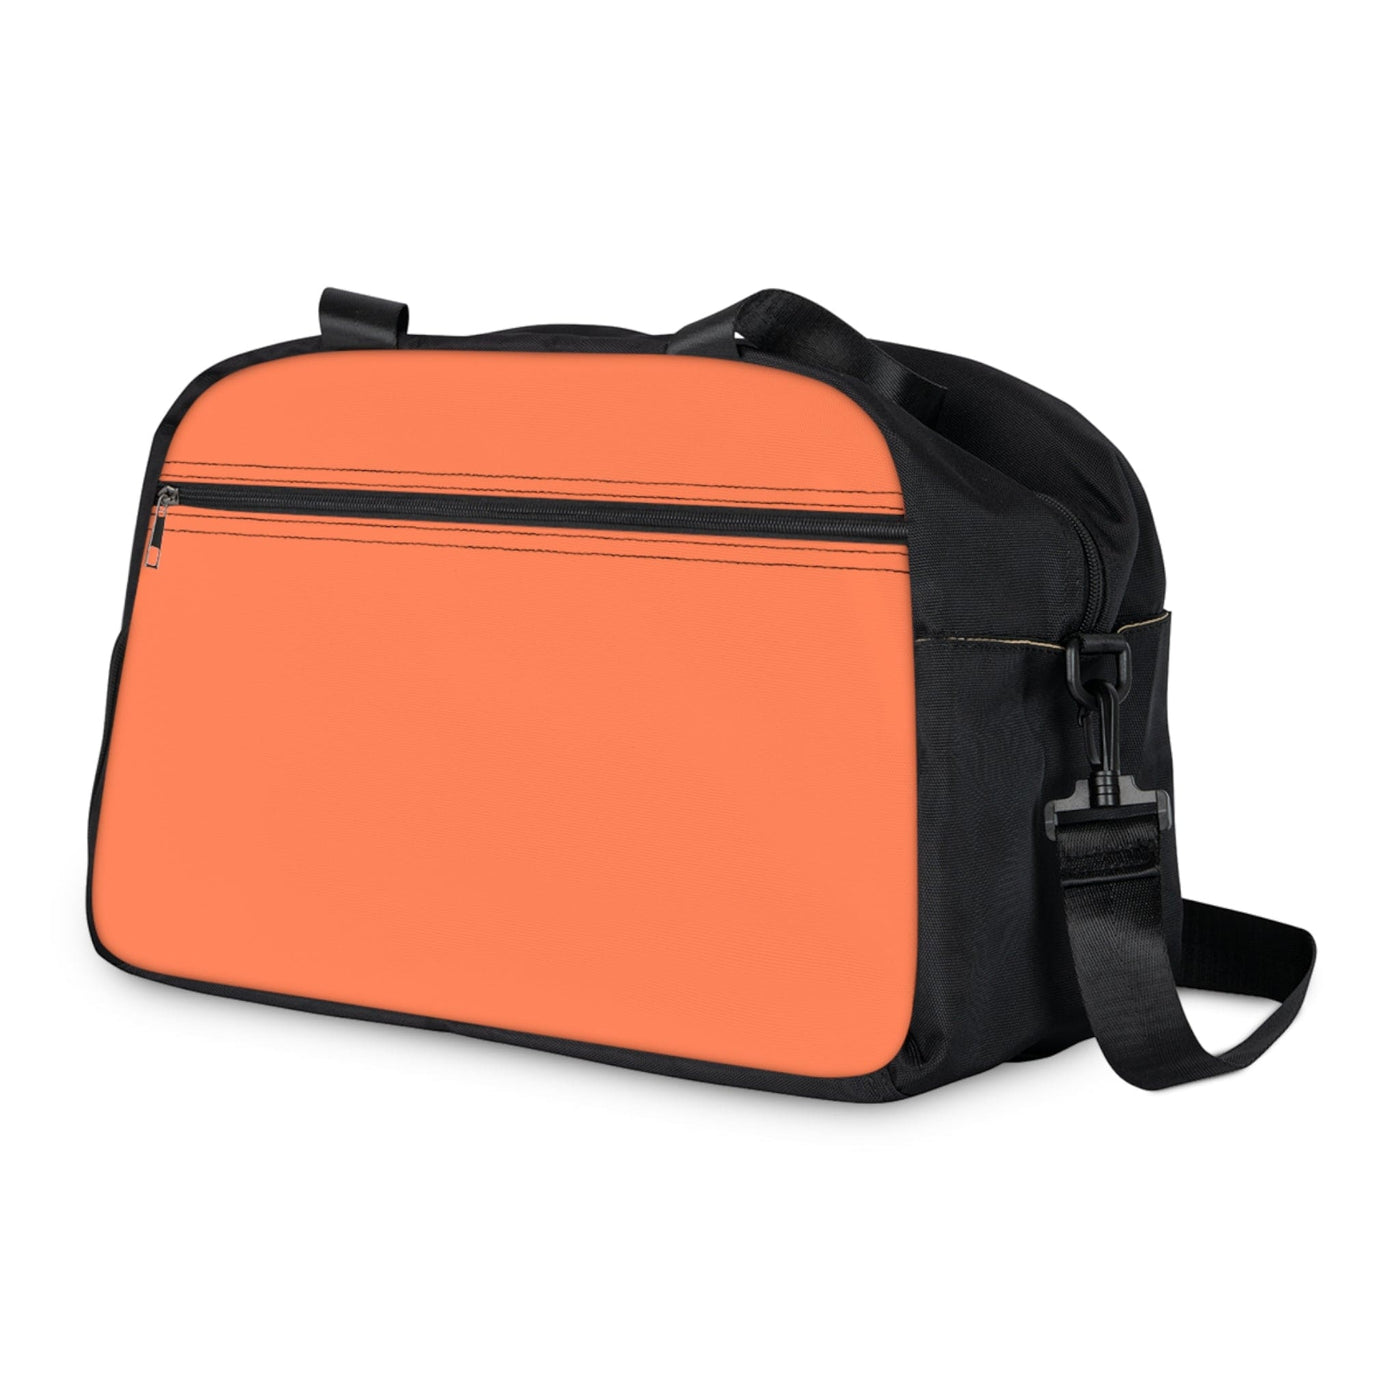 Travel Fitness Bag Coral Orange Red - Bags